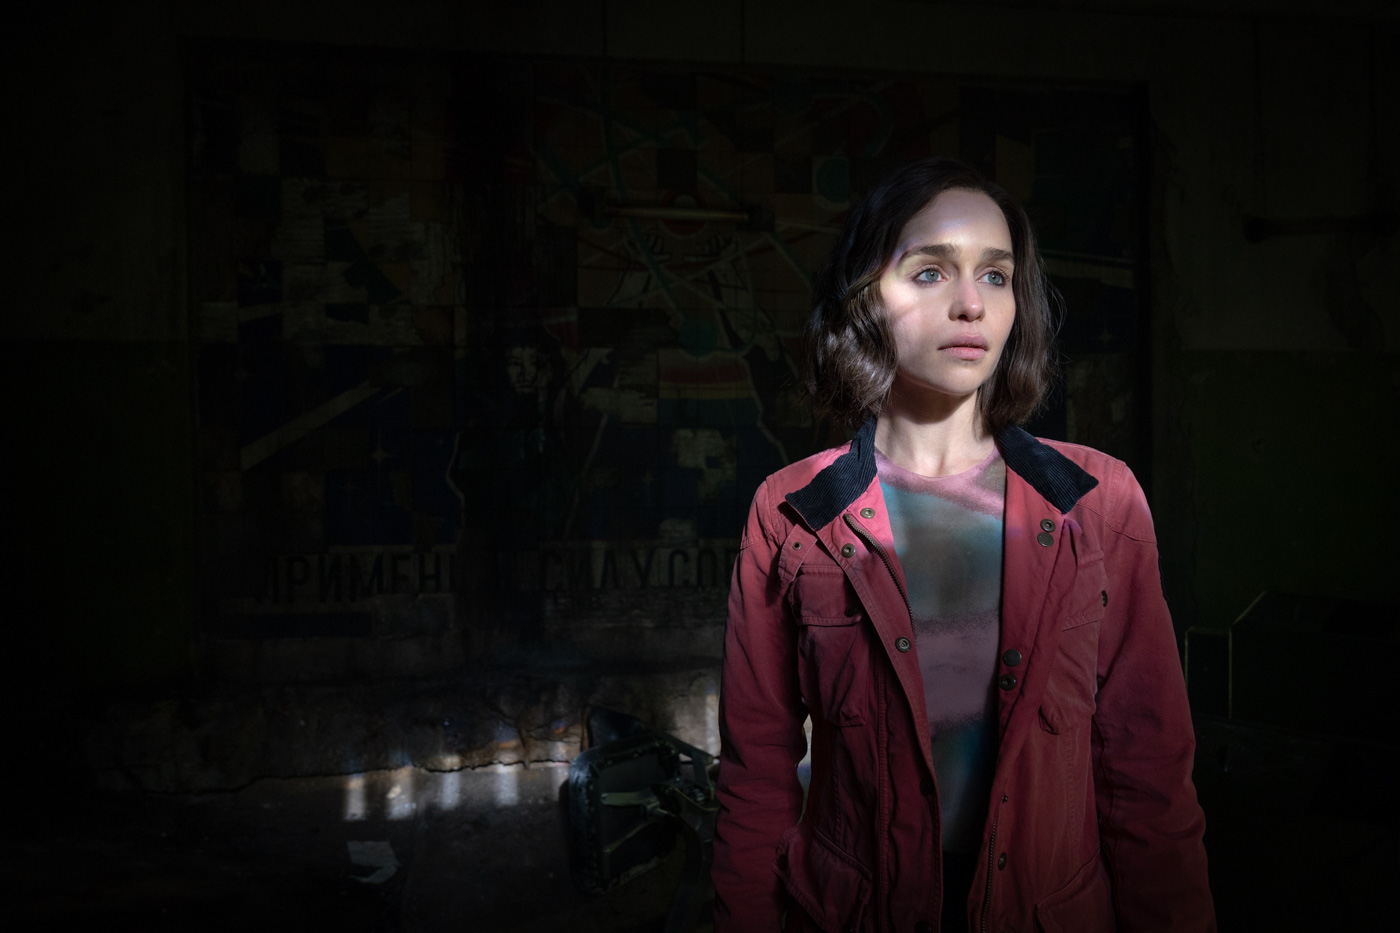 In a scene from the Marvel Studios series Secret Invasion, G’iah, played by Emilia Clarke, is standing in a dark cave with her face illuminated. She is wearing a pink and gray striped shirt and a deep pink jacket.